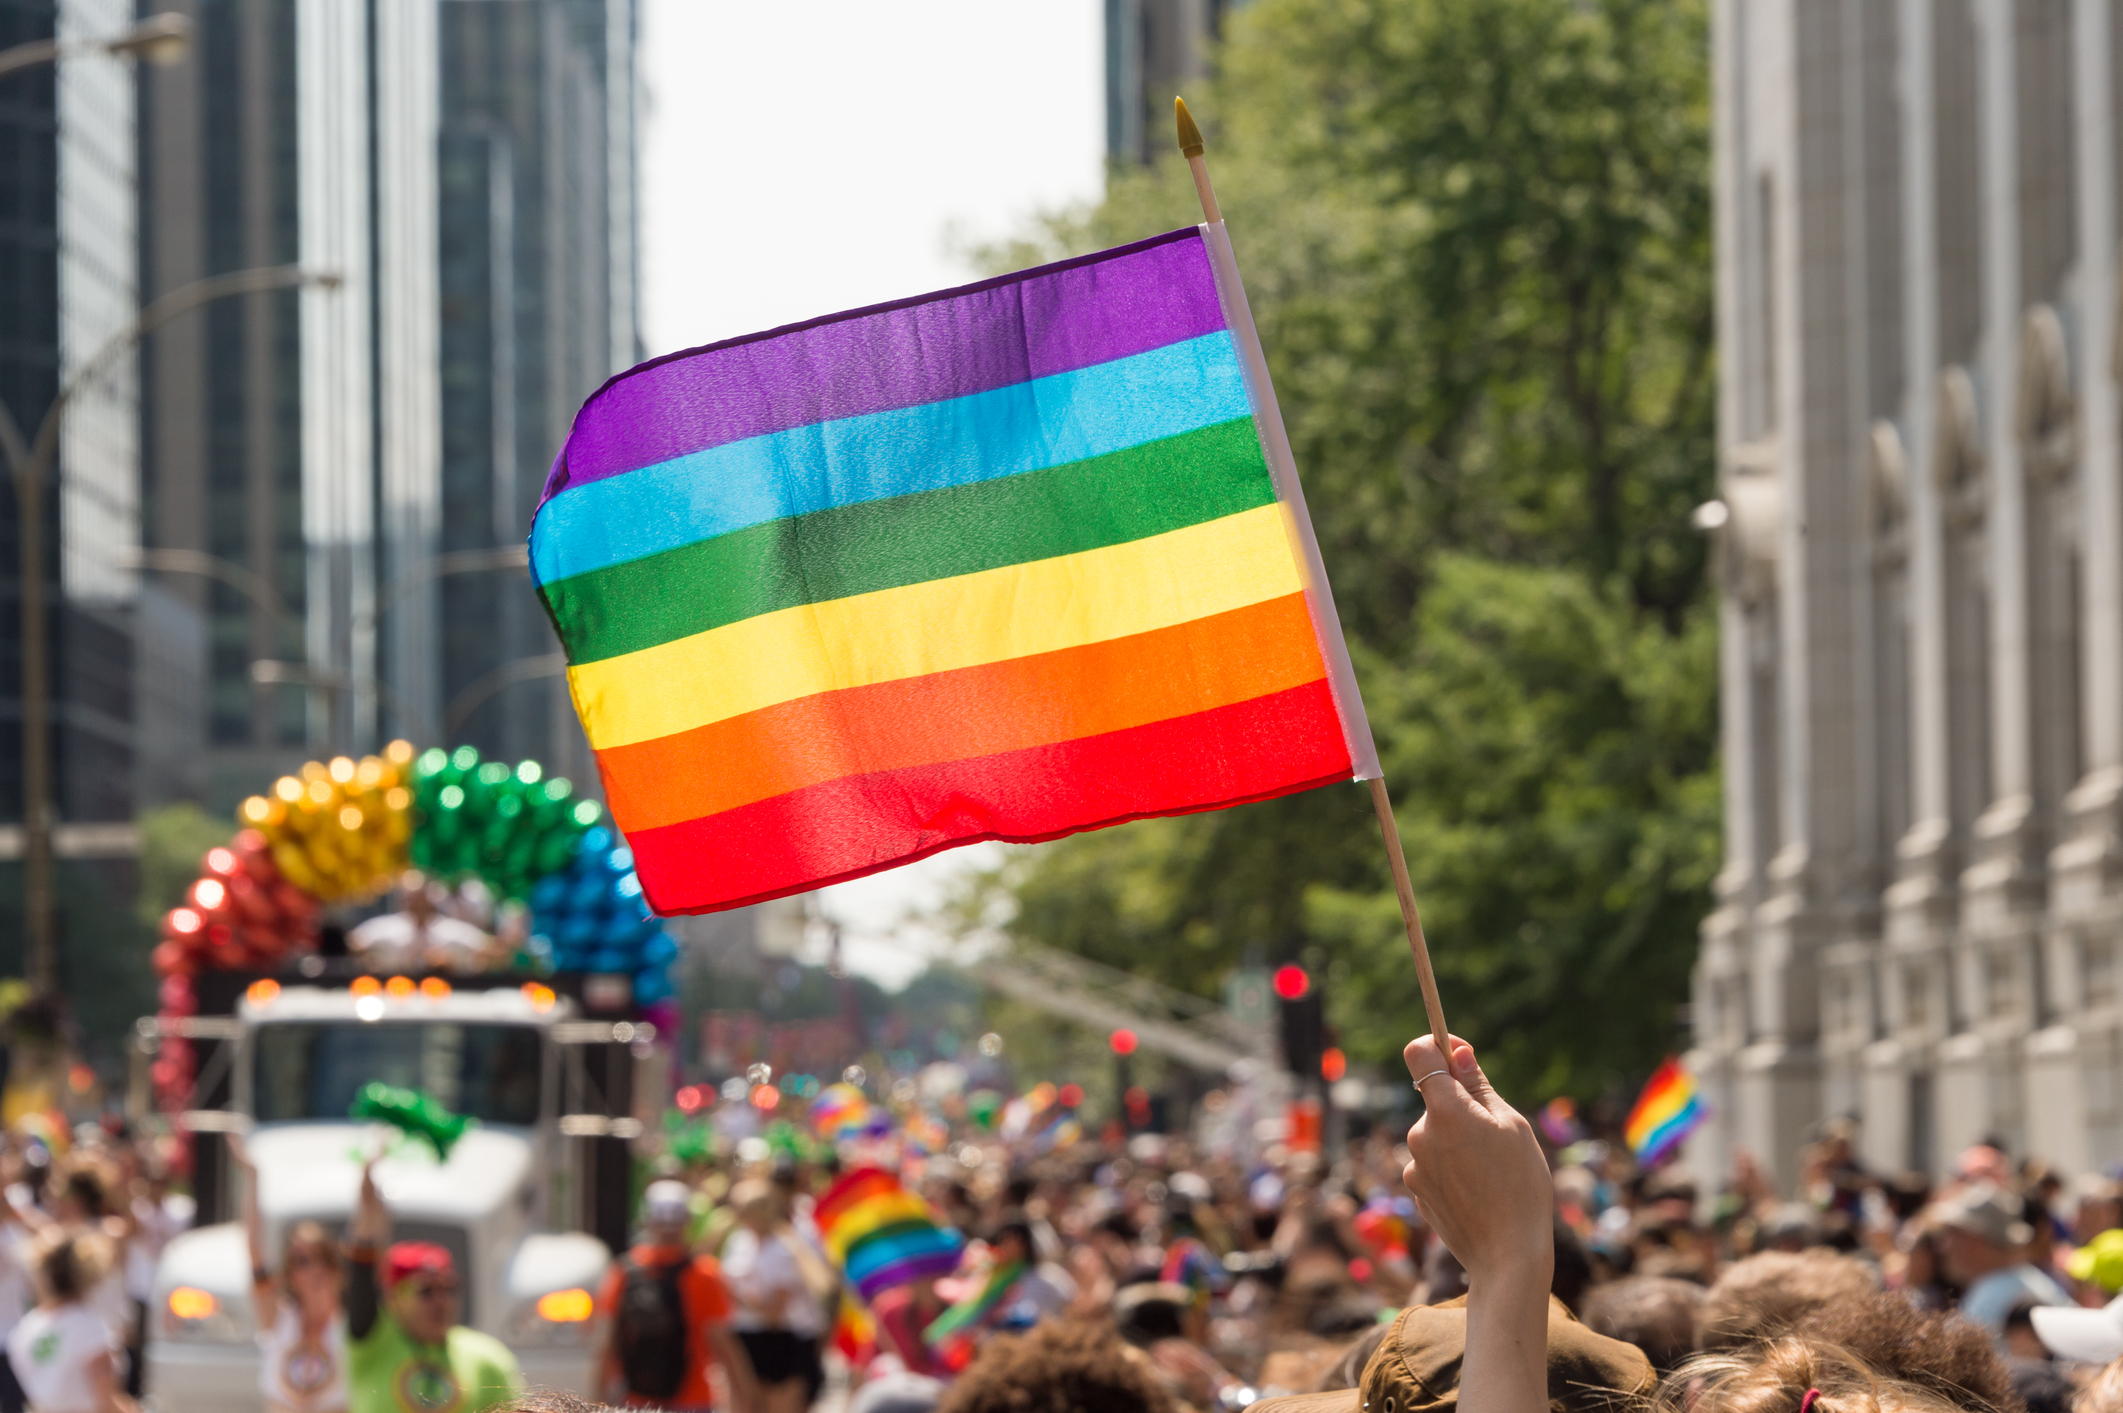 A view of Montreal's pride parade with a rainbow flag held high.